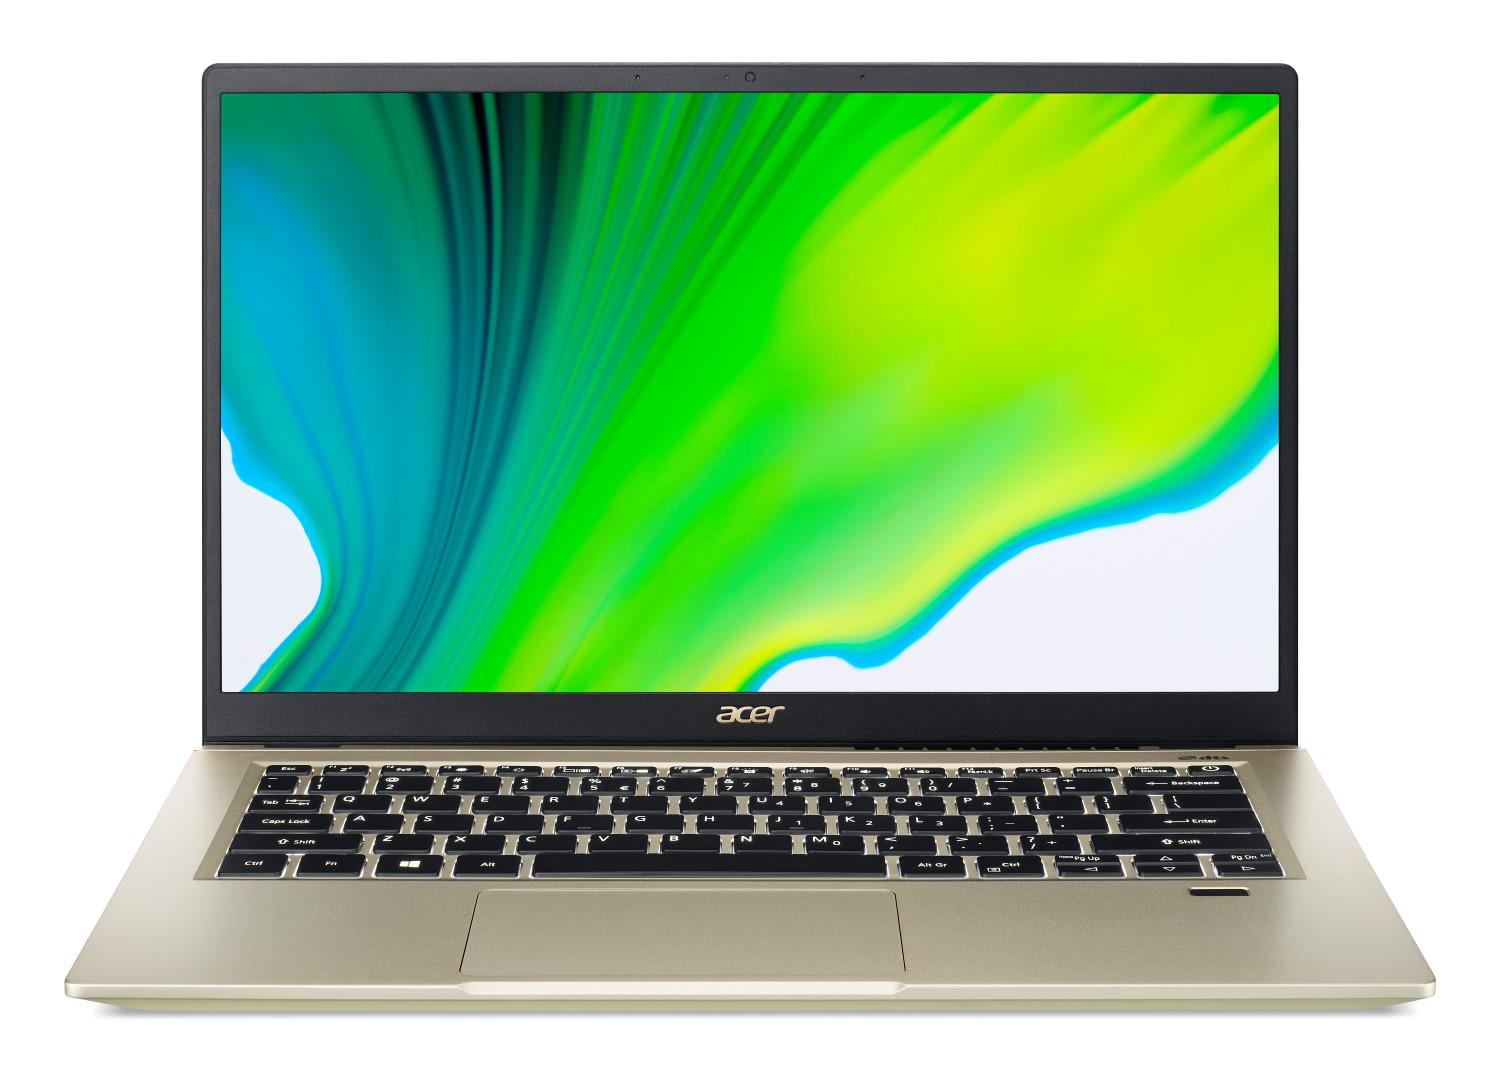 Laptop Acer Swift 3X SF314-510G, 14.0" display with IPS (In-Plane Switching) technology, Full HD 1920 x 1080, high-brightness (300 nits) Acer ComfyView LED-backlit TFT LCD, 16:9 aspect ratio, 72% NTSC color gamut, Wide viewing angle up to 170 degrees, Mercury free, environment friendly, Intel Core